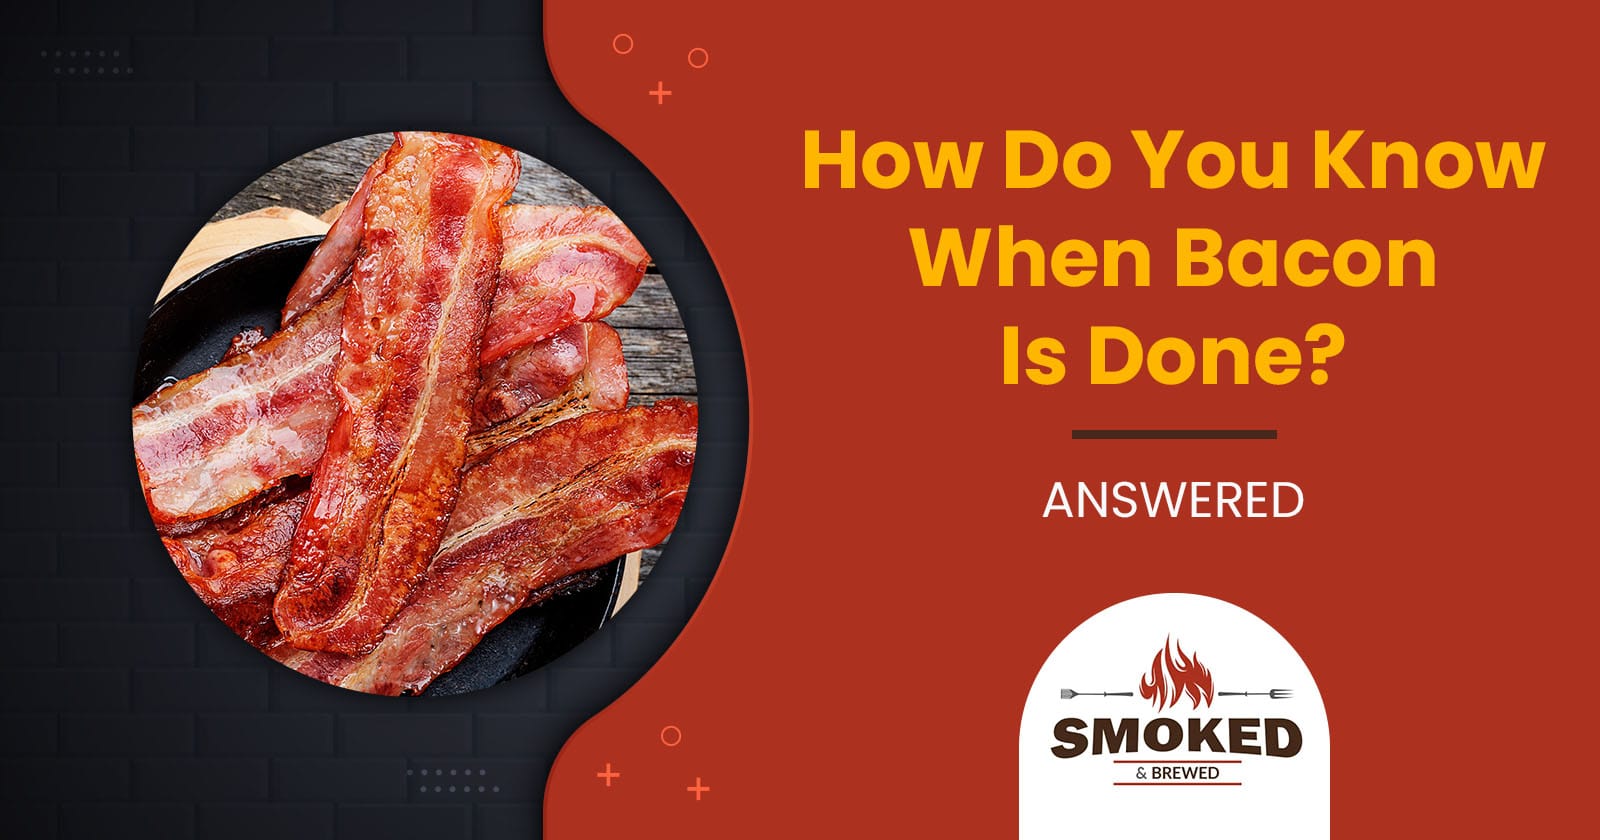 How Do You Know When Bacon Is Done? [ANSWERED]